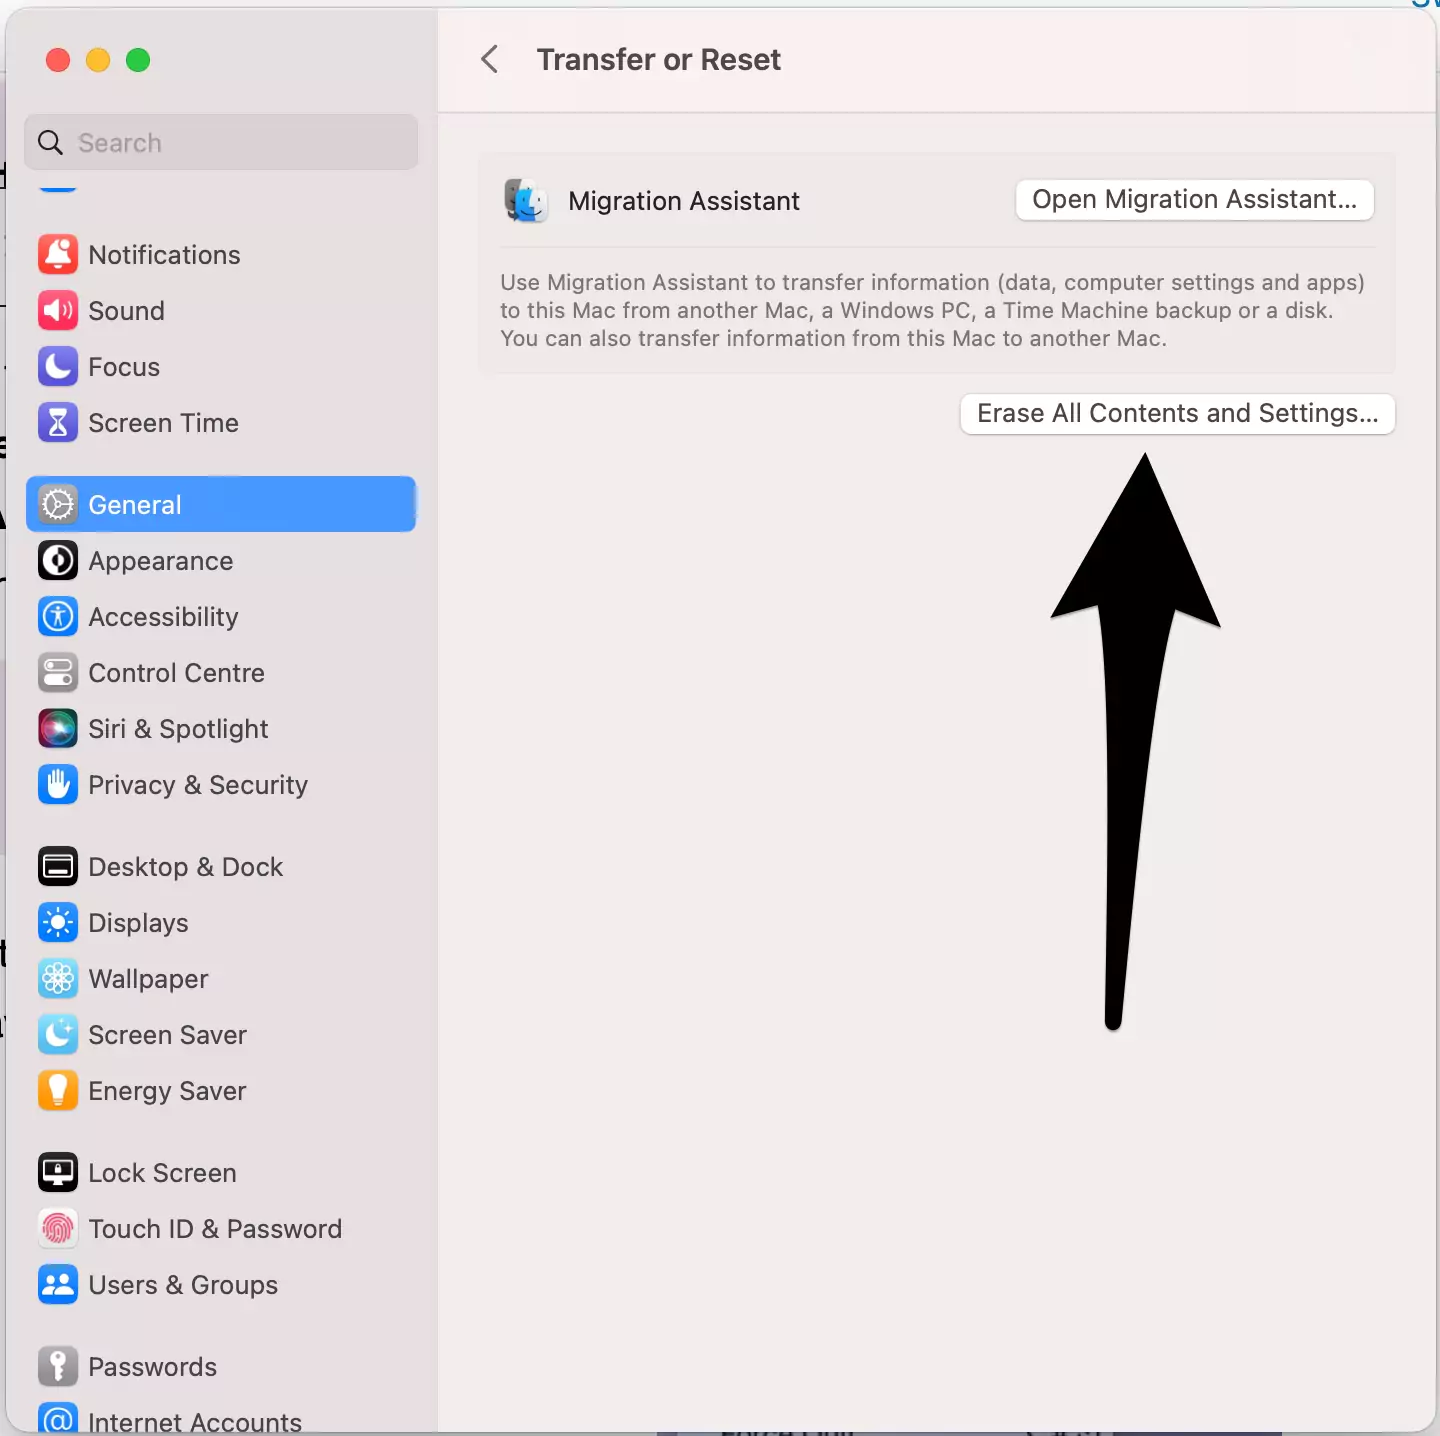 erase-all-contents-and-settings-option-on-mac